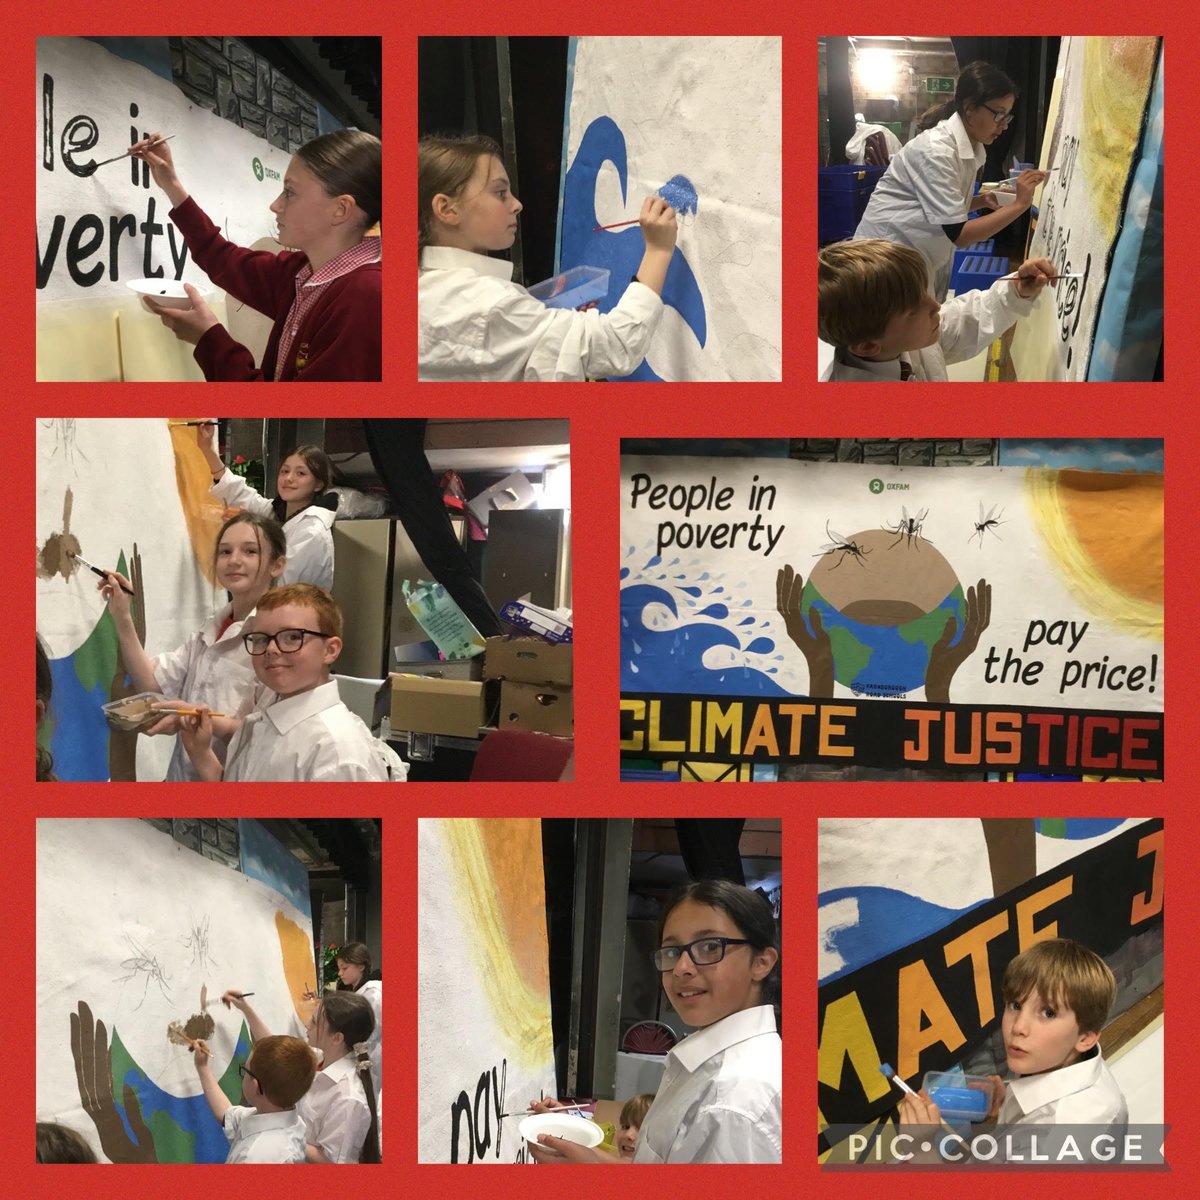 We are very proud to have been selected to make a banner about Climate Change that will be displayed at the Glastonbury Festival festival this year. Our staff and children have been very busy and it is nearly done! @LivEchonews @glastonbury #Glastonbury #ClimateJustice